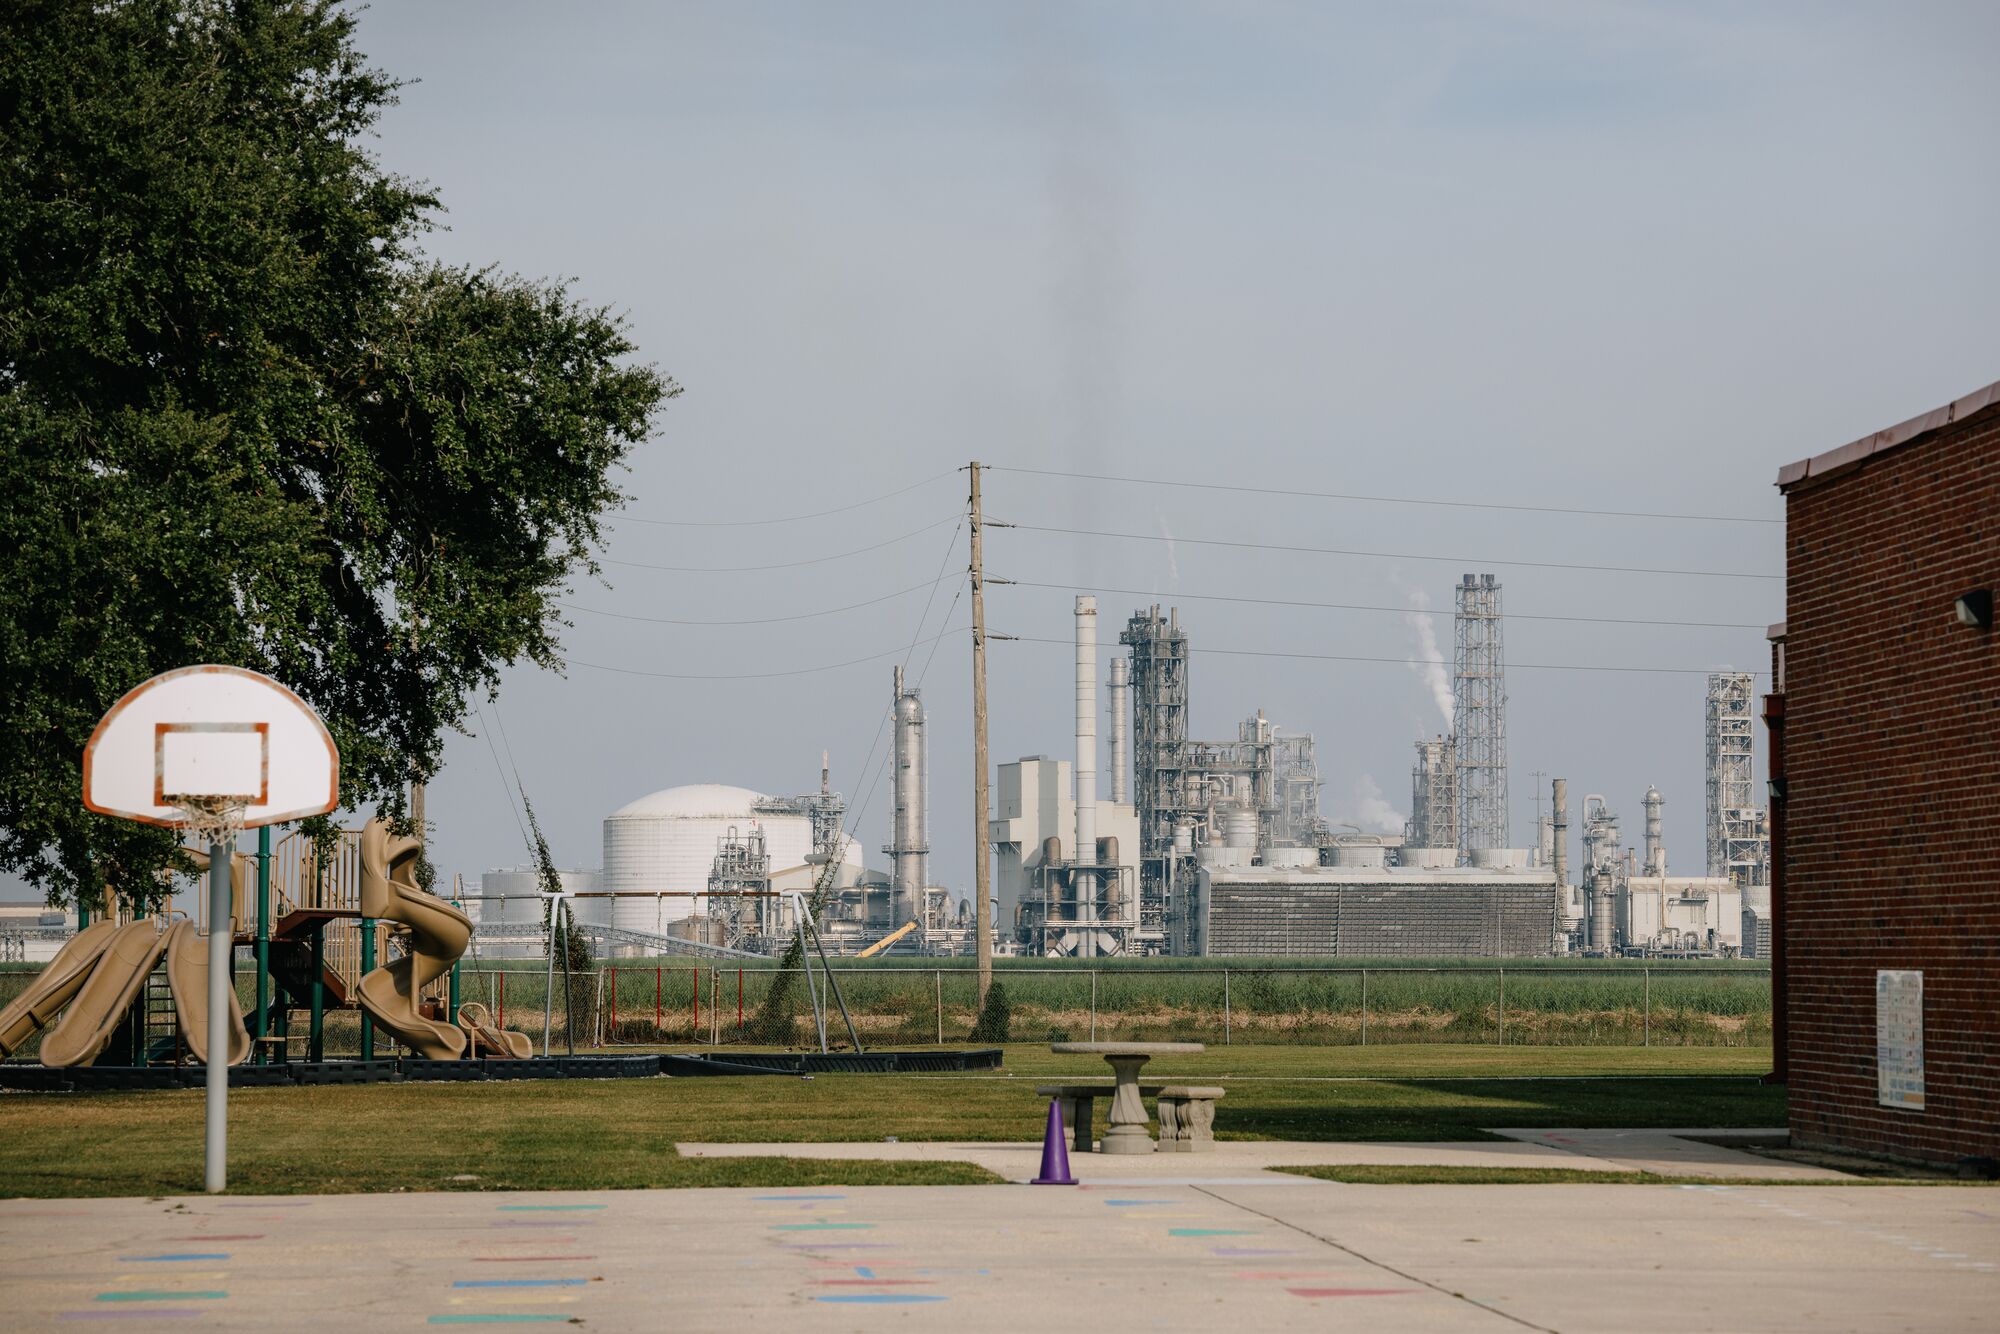 The Donaldsonville Primary School in Ascension Parish, Louisiana, sits directly next to the CF Industries plant.